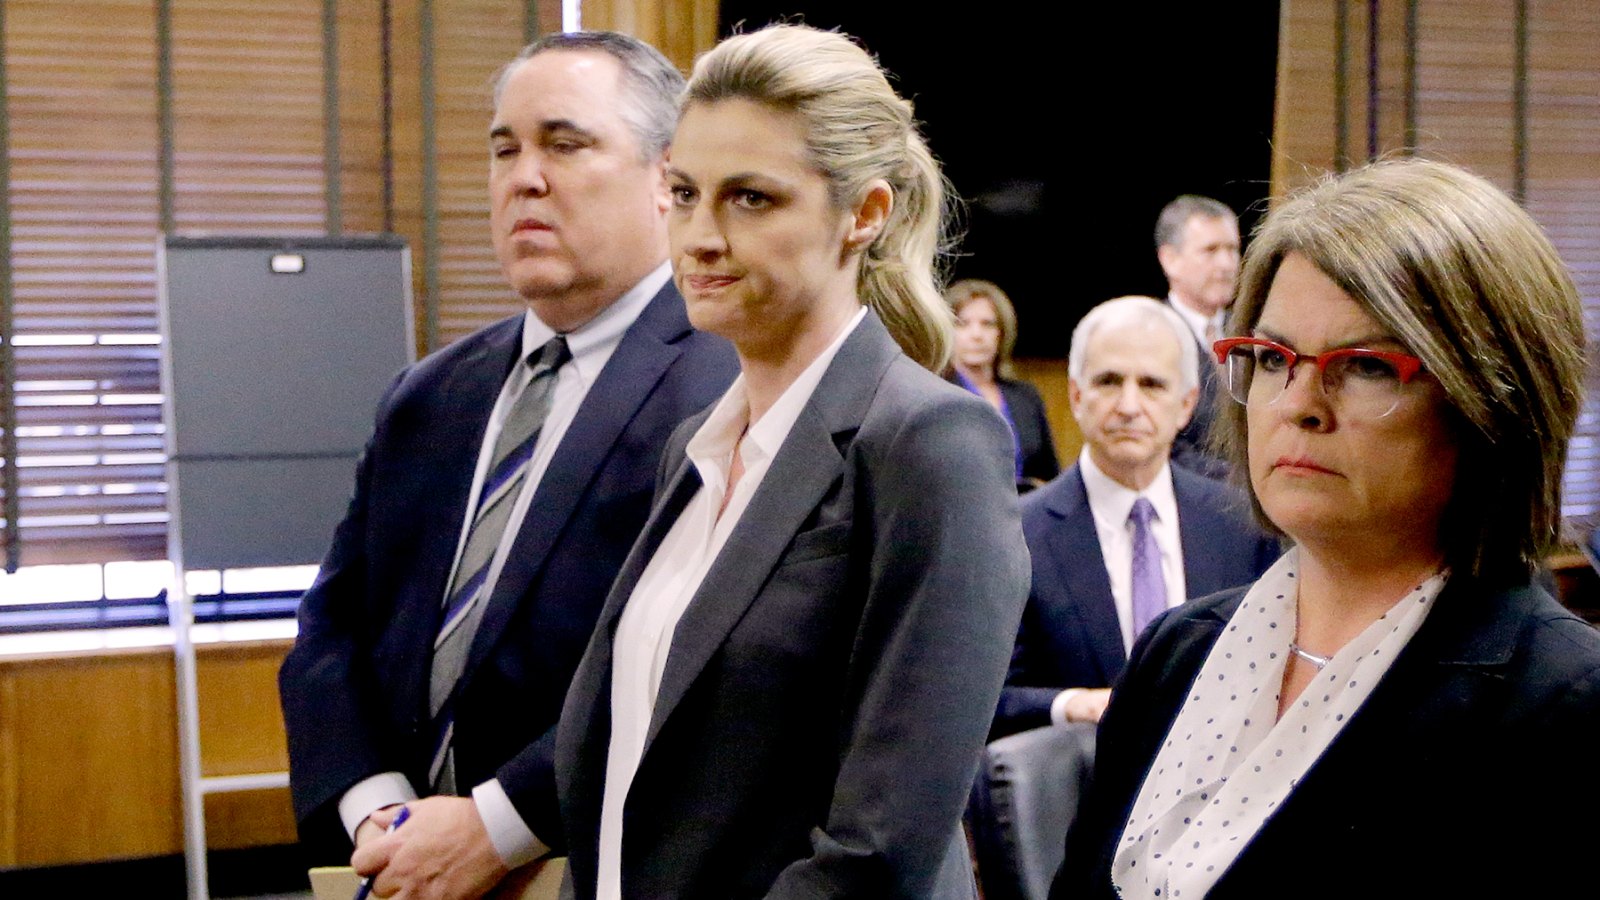 Erin Andrews stands with attorney Scott Carr, second from left, as the jury arrives in the courtroom after reaching a verdict Monday, March 7, 2016, in Nashville, Tenn.